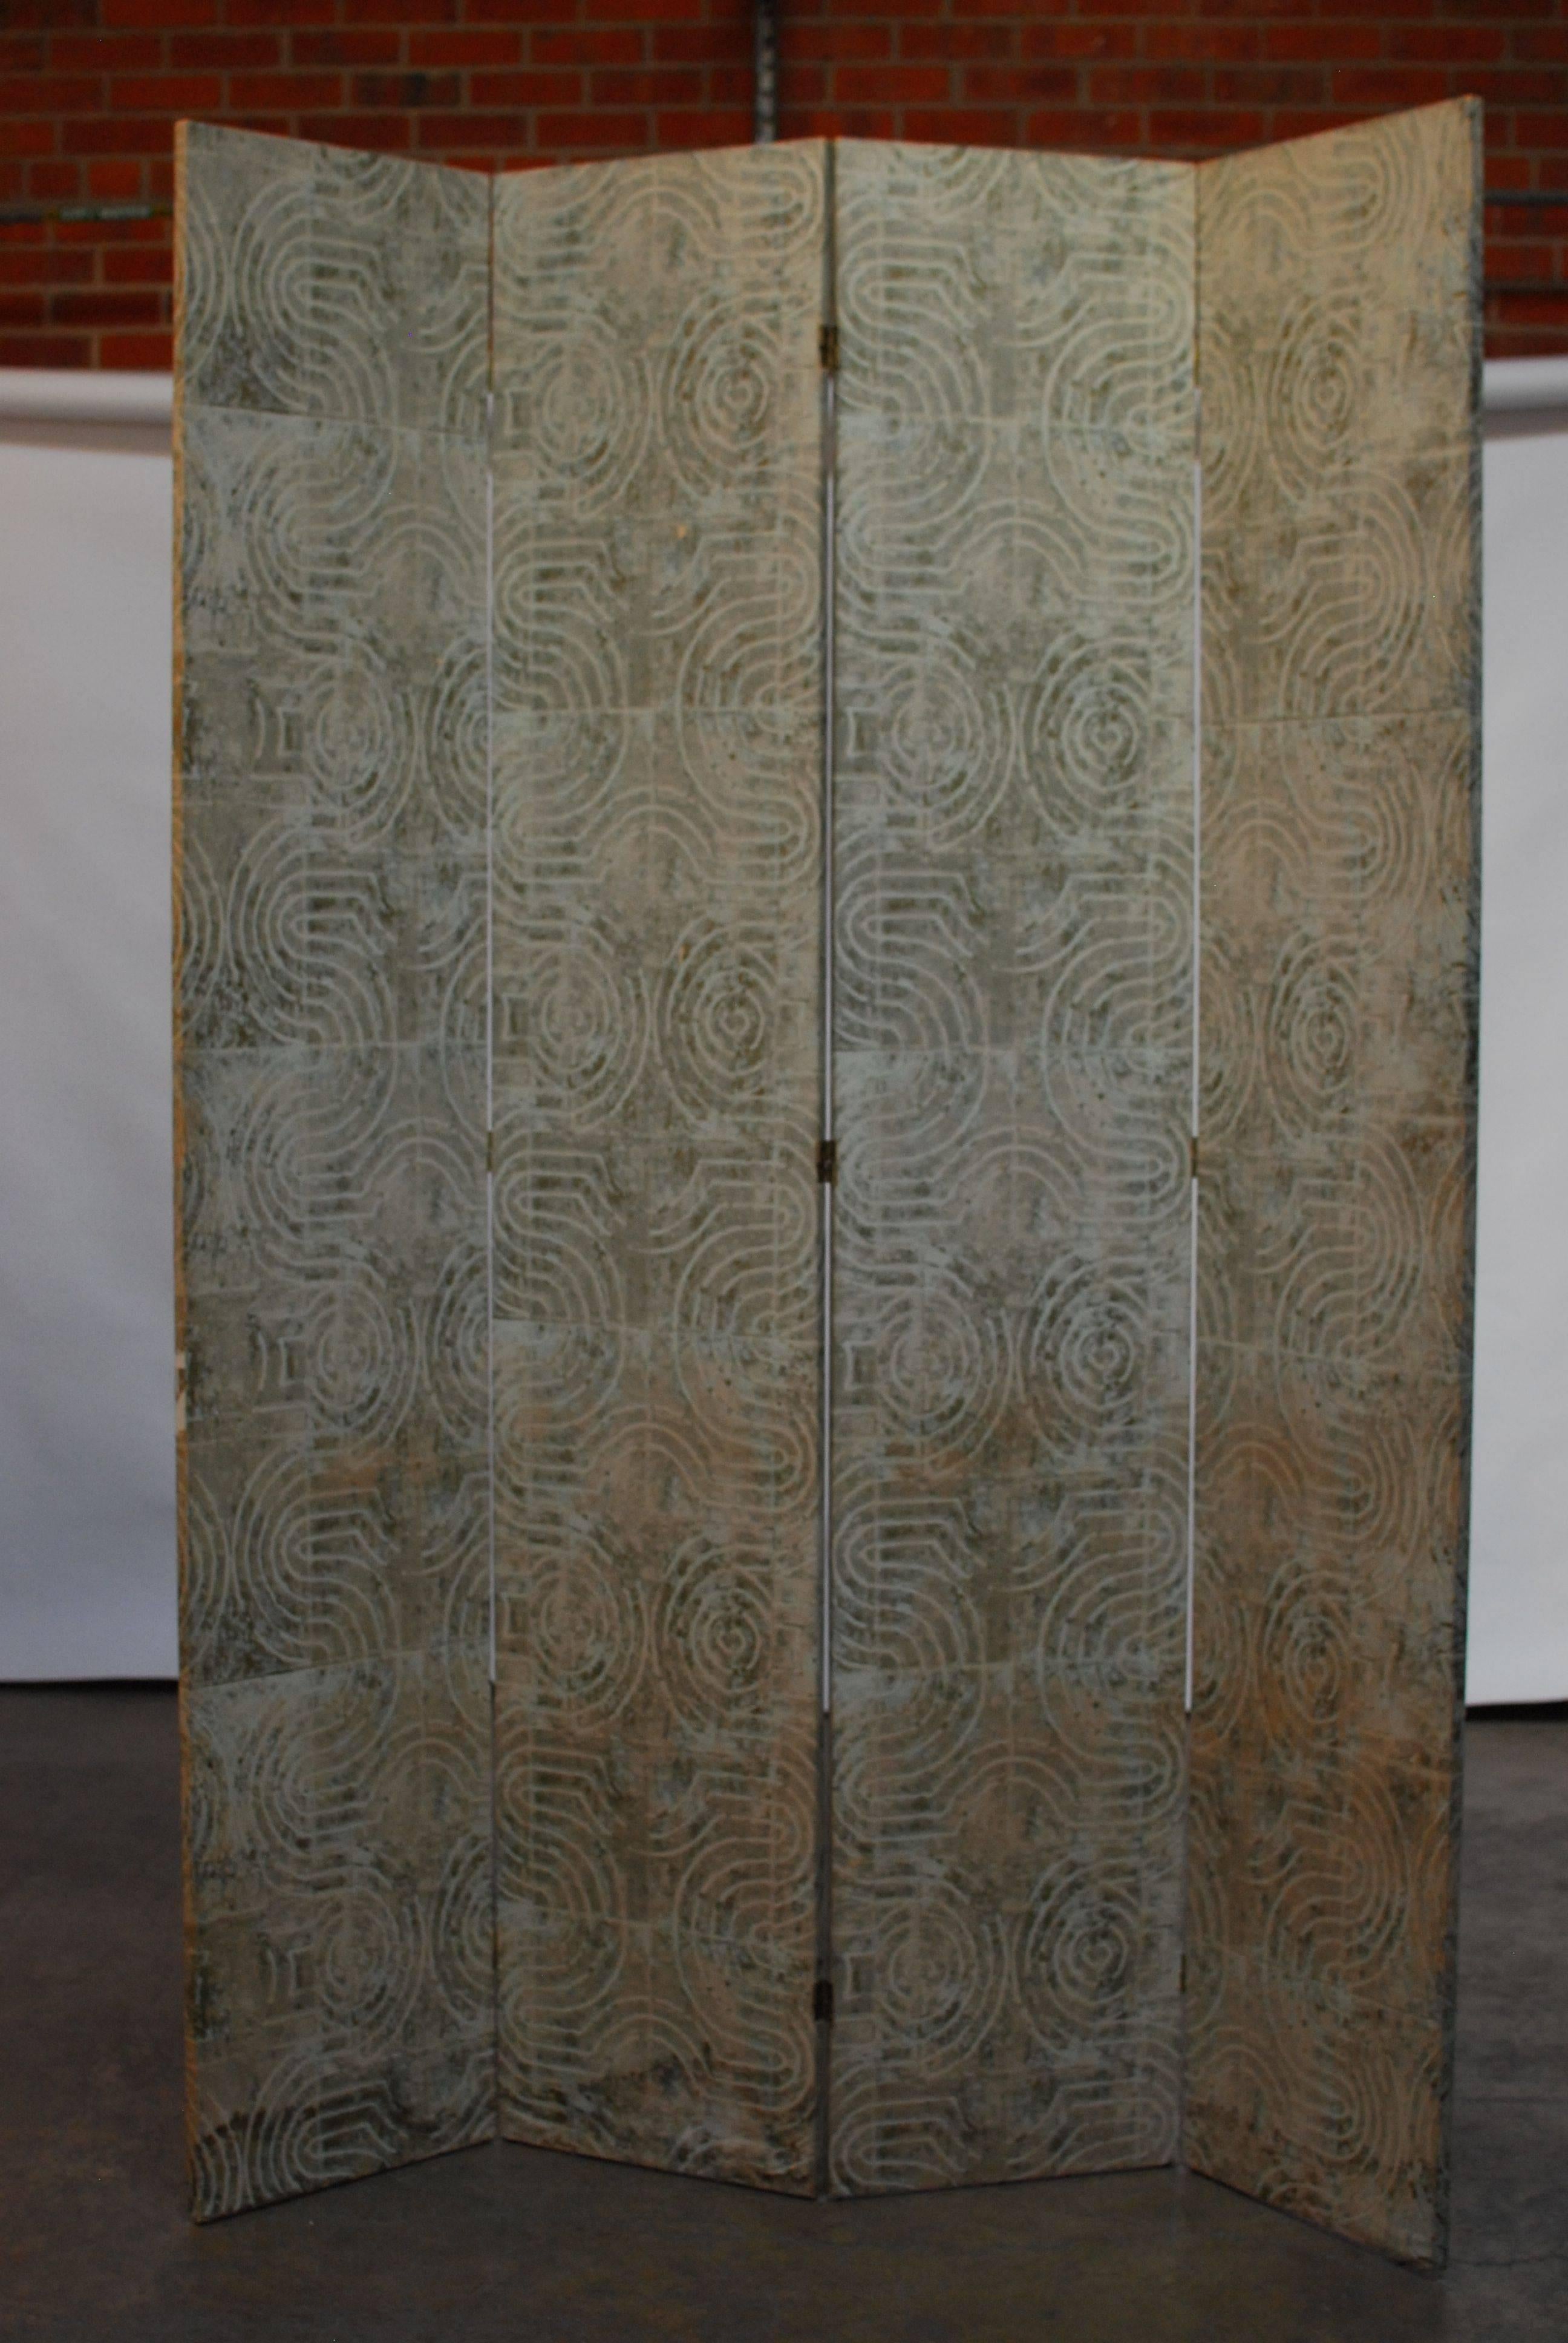 Chic four-panel folding Art Deco wallpaper screen featuring a geometric pattern over a delicate gilt background. Elegant modern age shapes decorate this impressive screen with subtle colors of light bamboo green. The panels have a lovely rich patina.